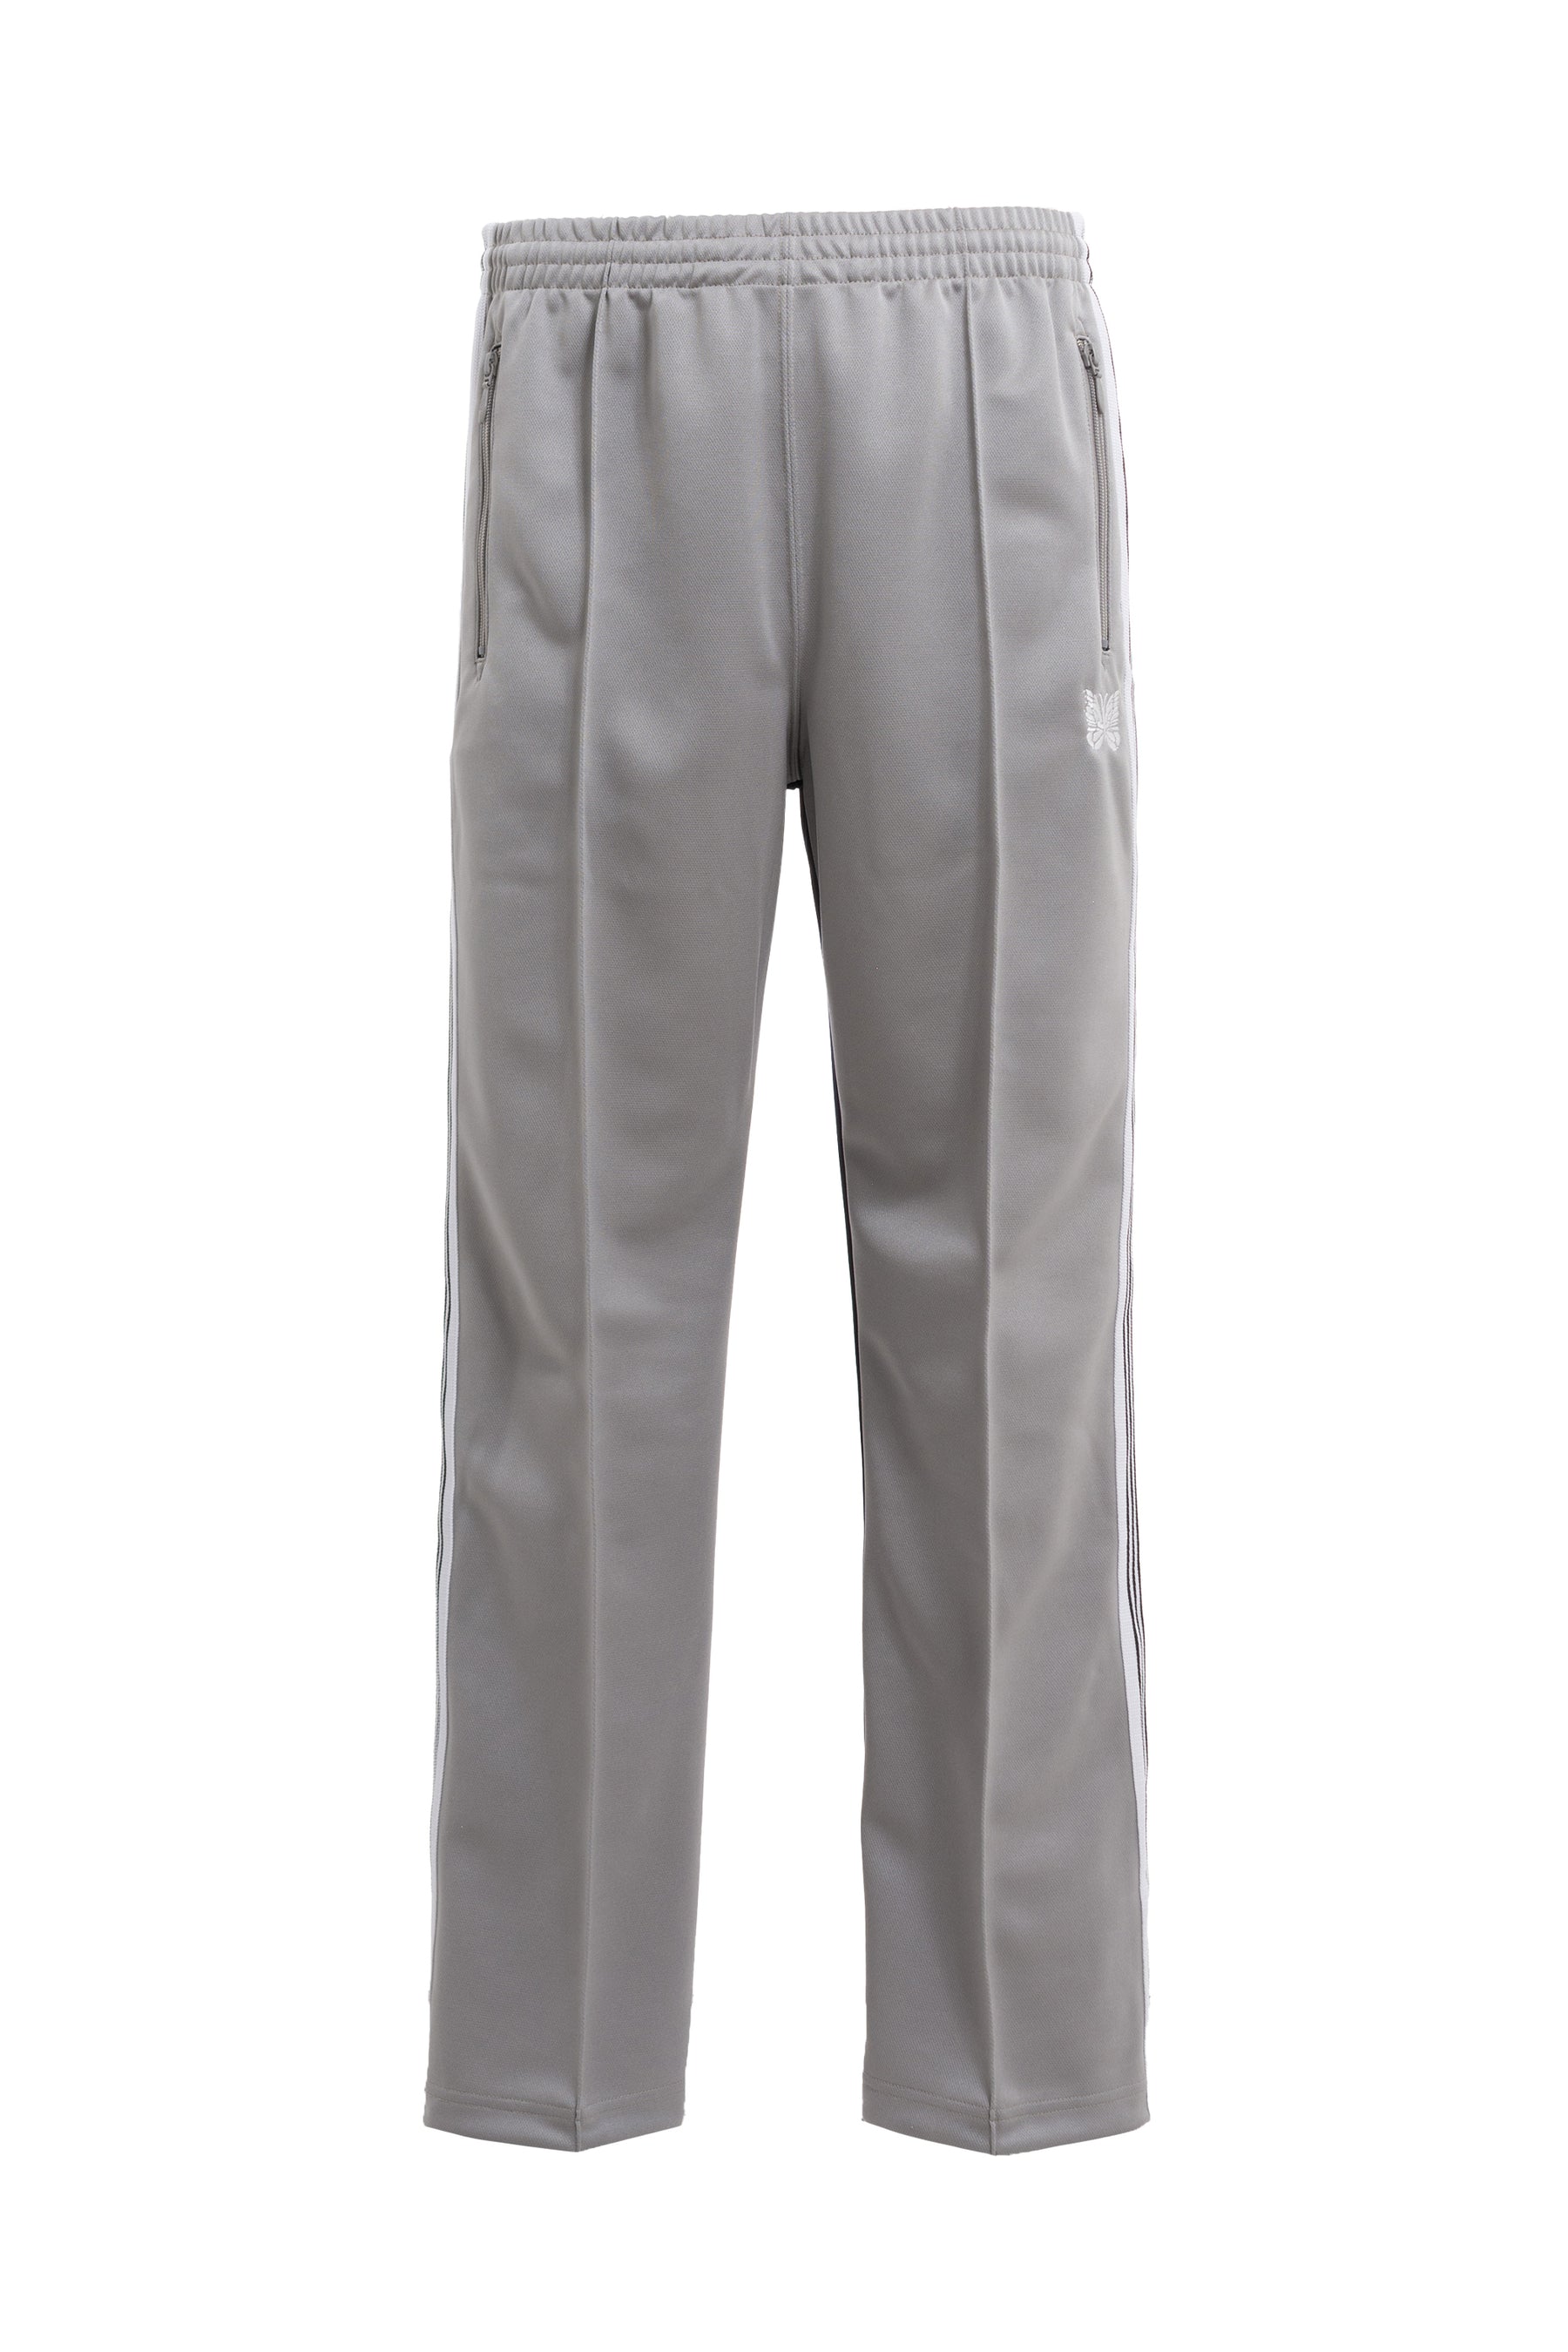 EMPTY R _ _ M x Needles TRACK PANTS - POLY SMOOTH - EMPTYROOM EXCLUSIVE / NVY GRY